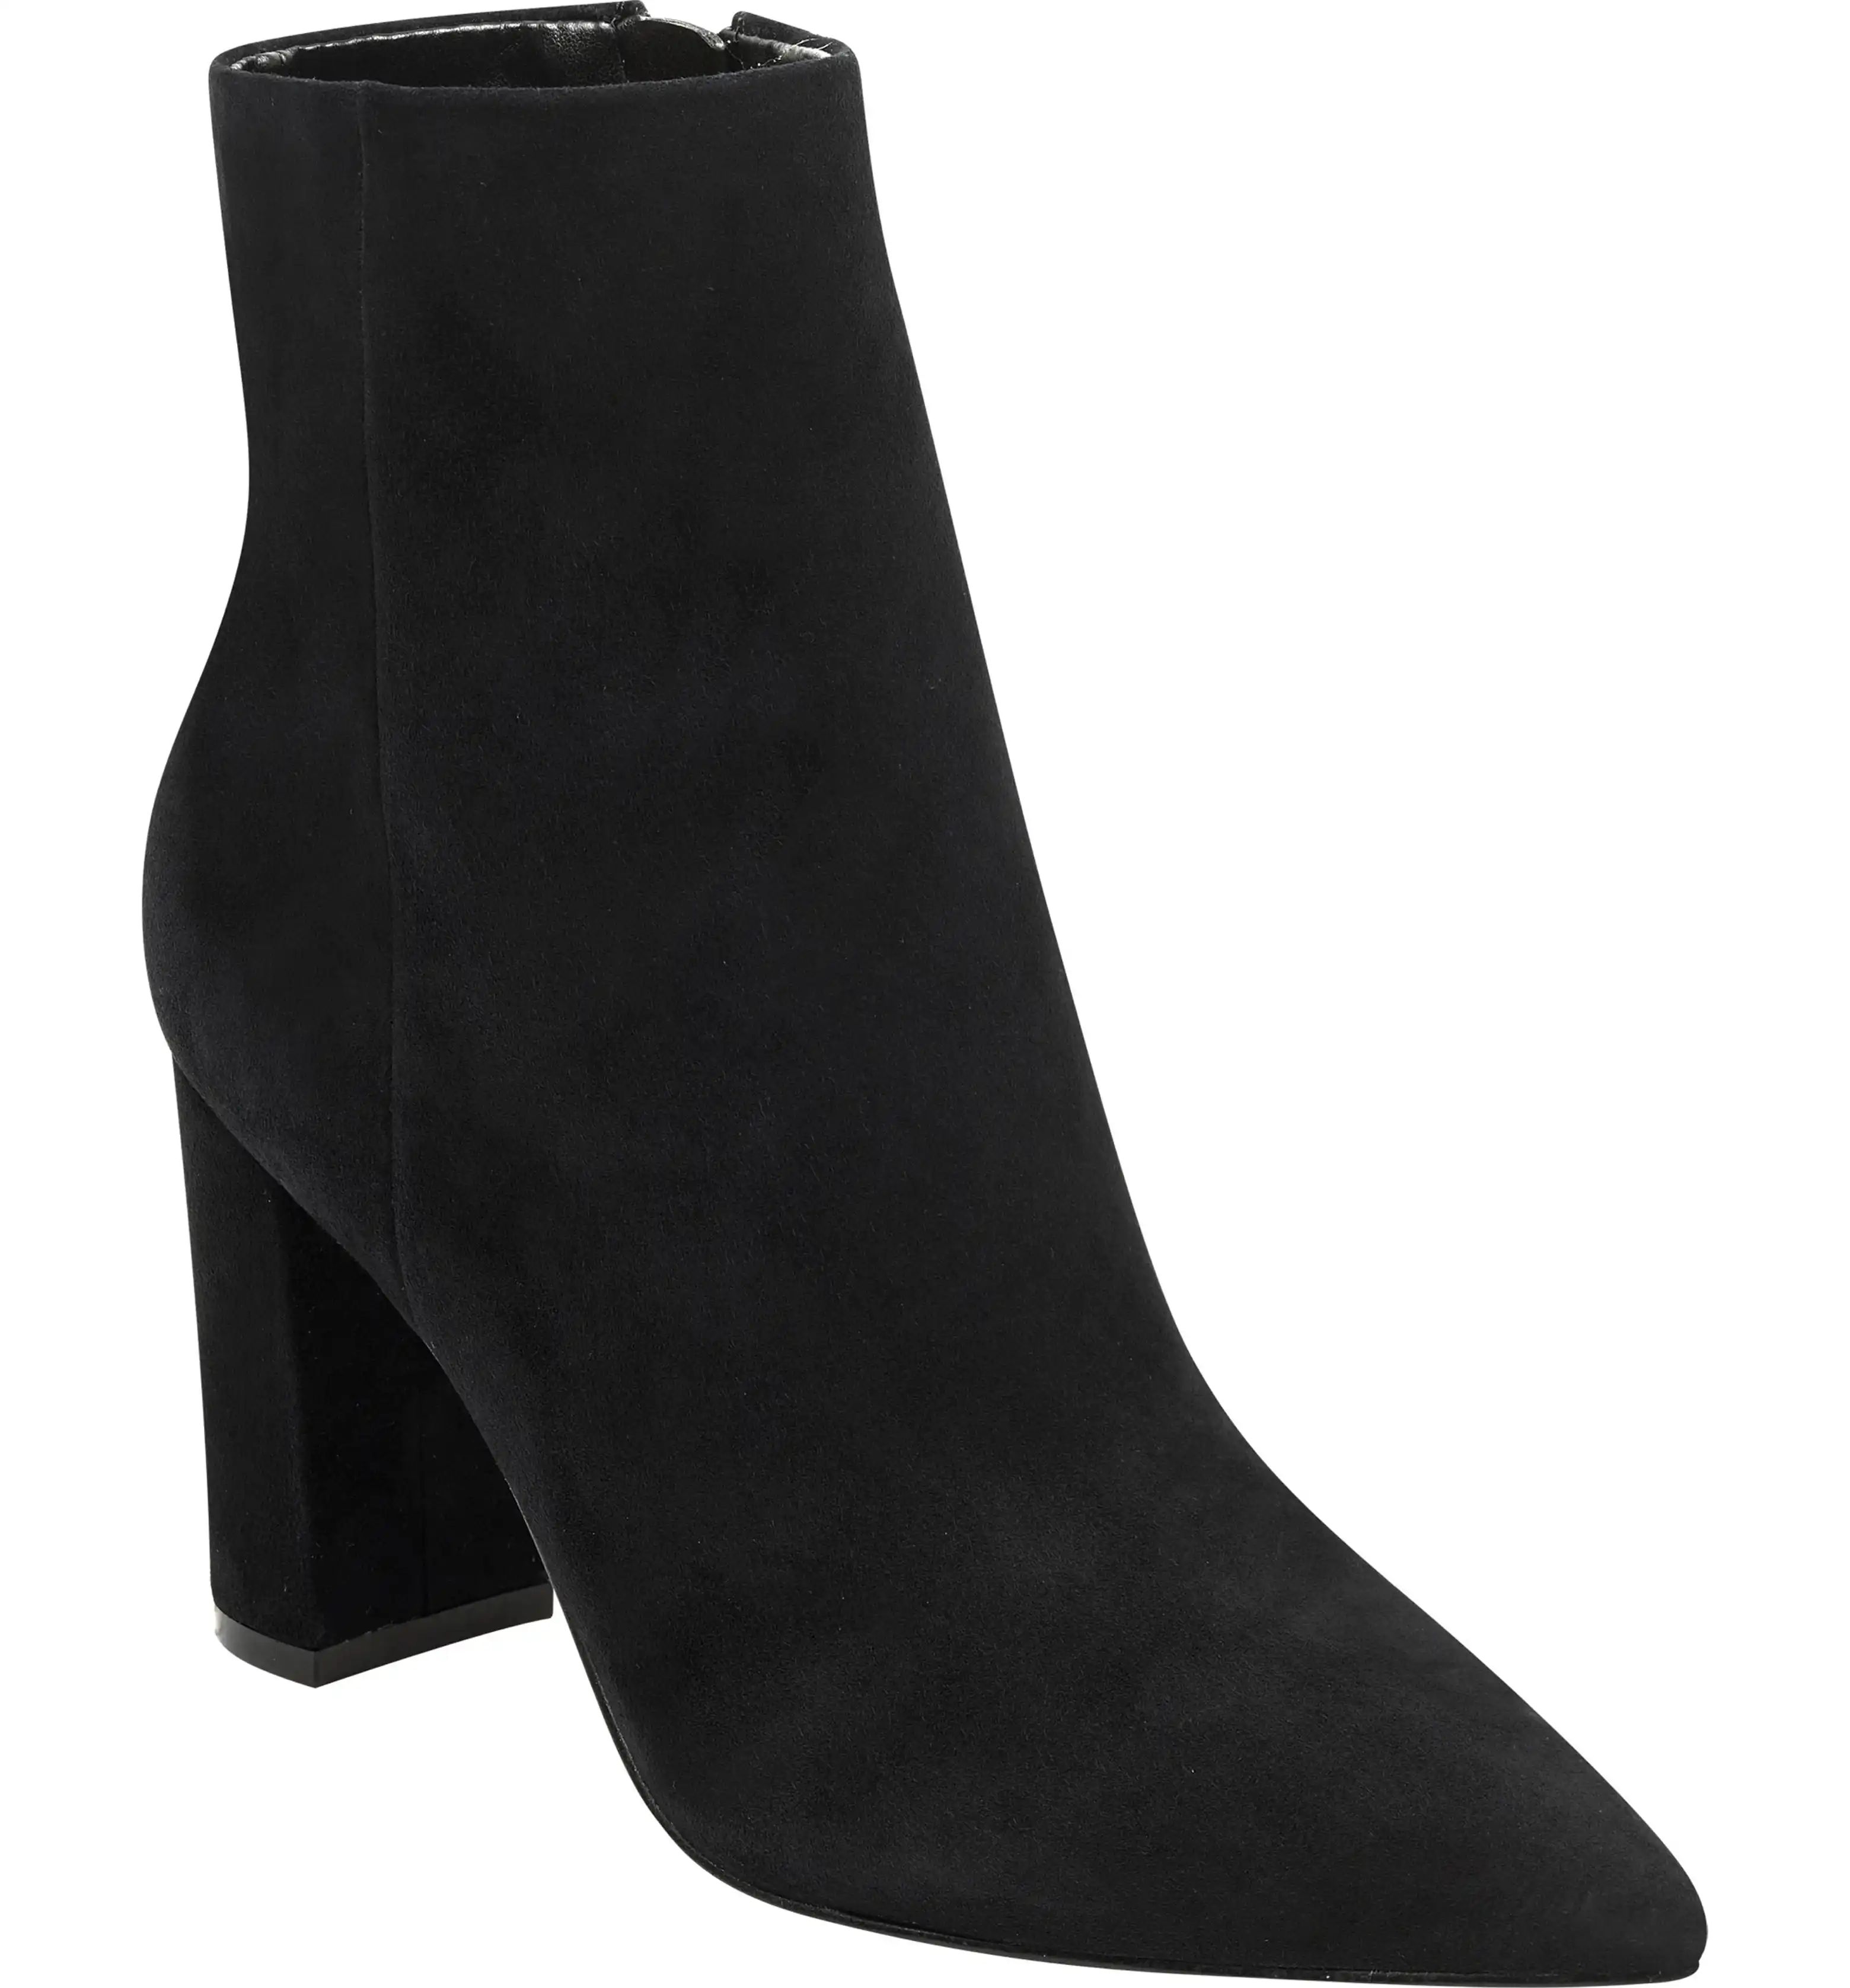 . Ulani Pointy Toe Bootie | Nordstrom